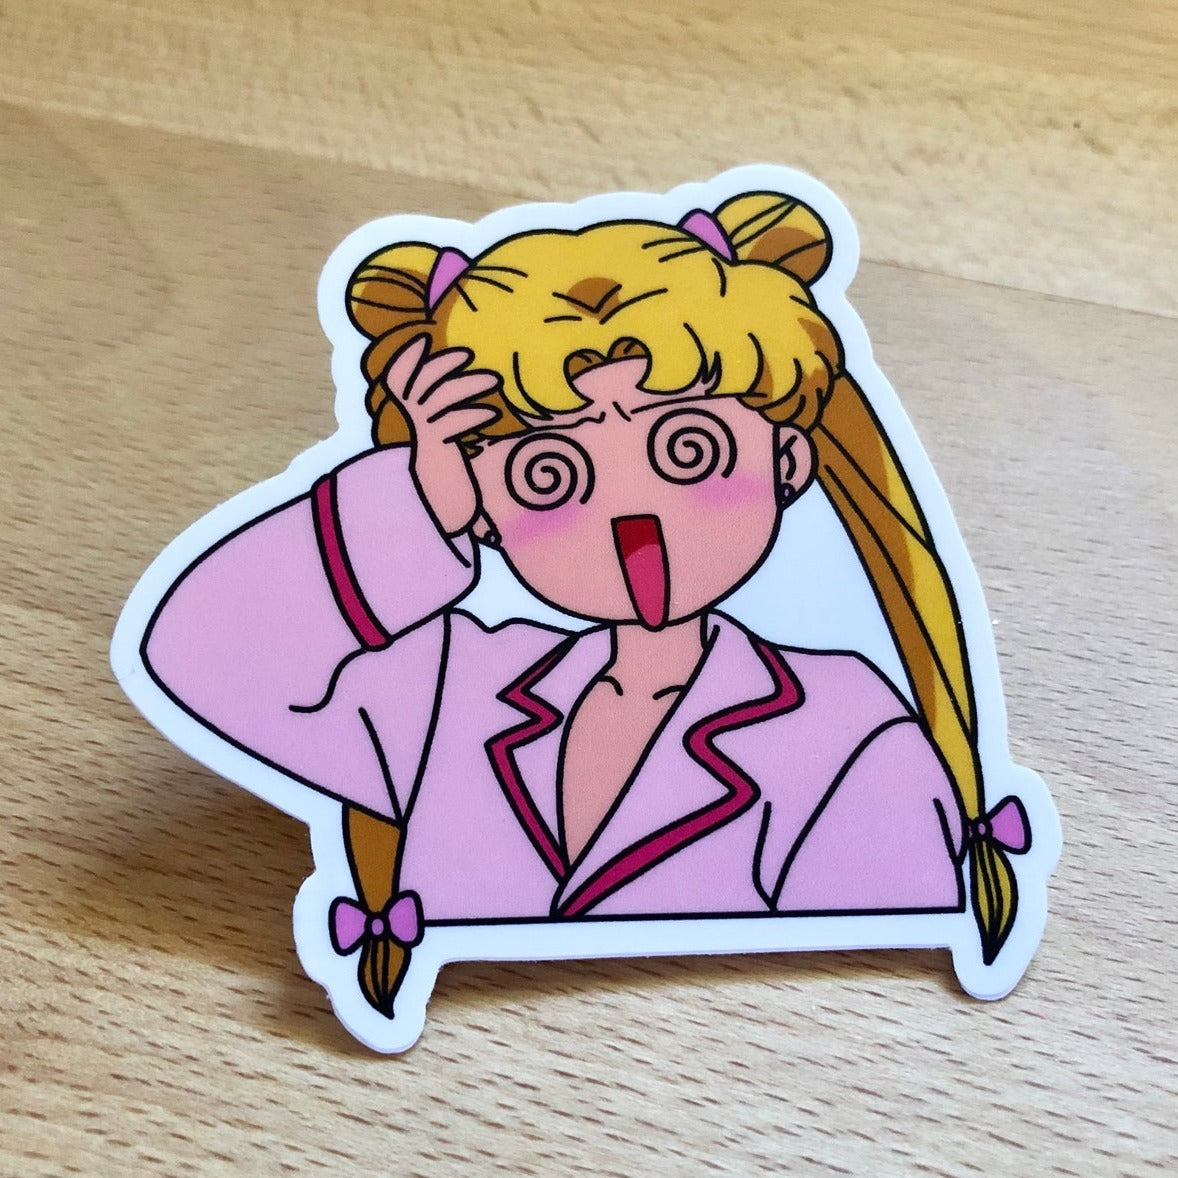 Famous Anime Character Paper Sticker (Different Stickers) - Pack of 15 :  Amazon.in: Toys & Games